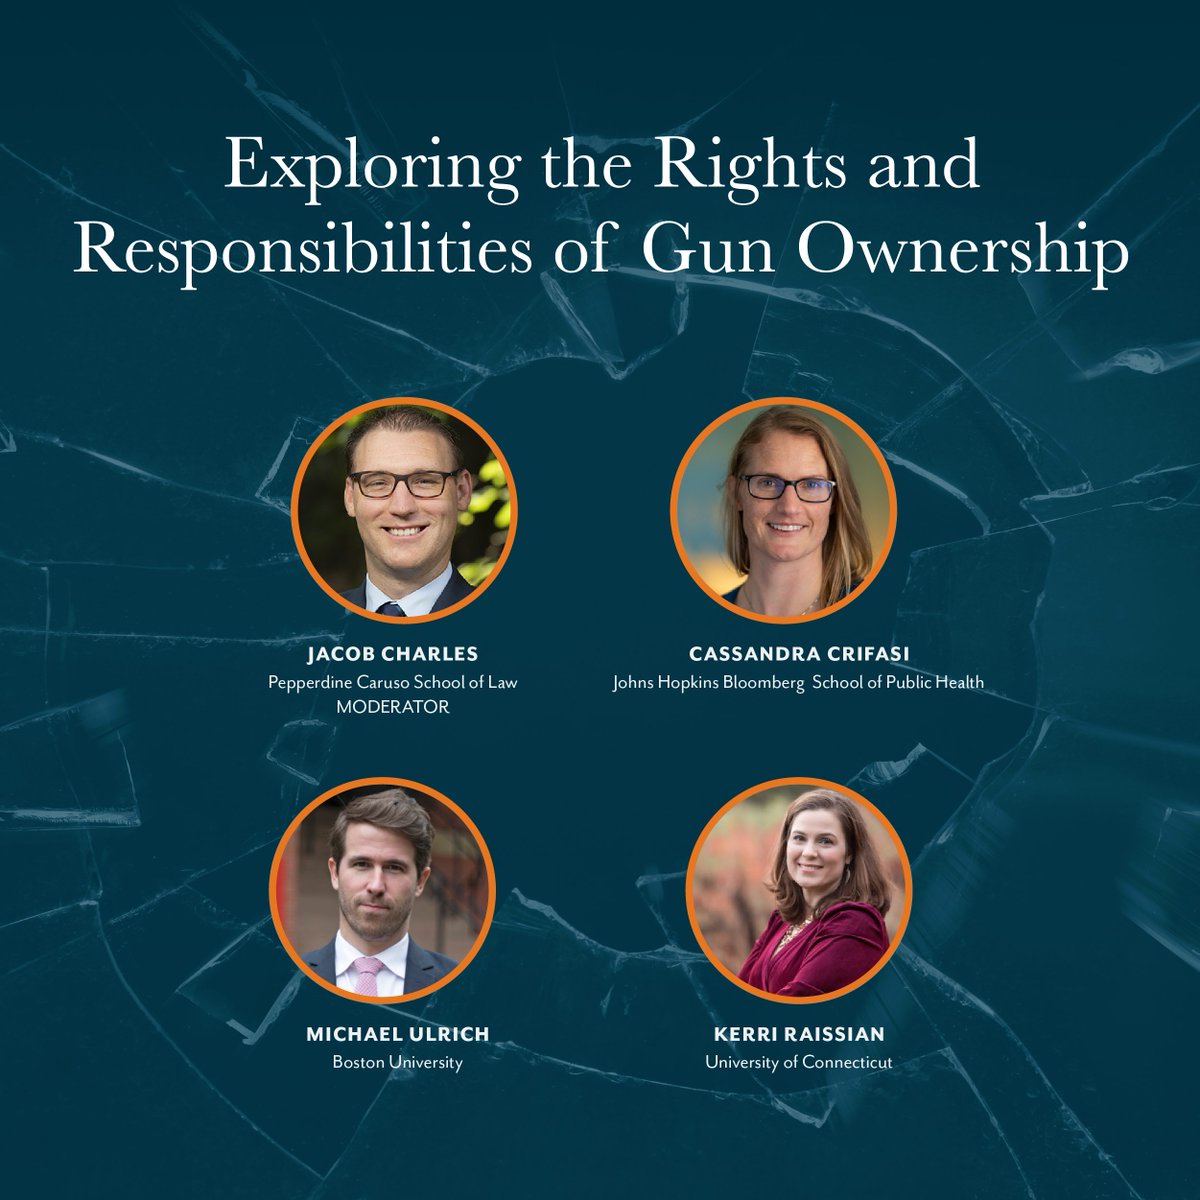 Join us on 7/20 for our next webinar on preventing gun violence with a focus on gun ownership rights and responsibilities feat. @JacobDCharles @MichaelRUlrich, @kerri_raissian, @DrCrifasi. Register now: us02web.zoom.us/webinar/regist…